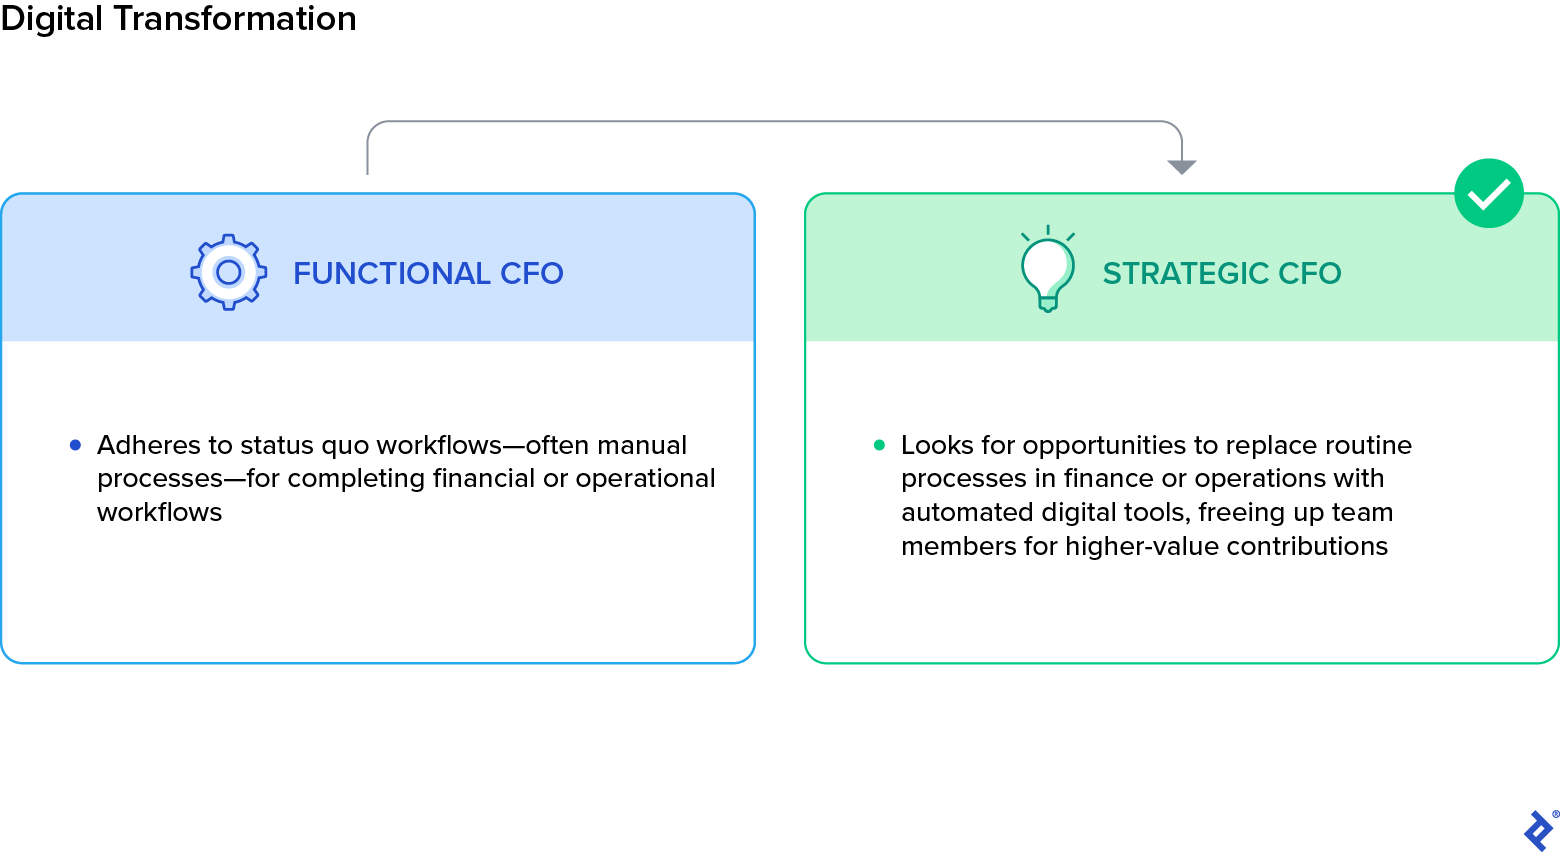 The functional CFO adheres to status quo workflowsâoften manual processesâfor completing financial or operational workflows. The strategic CFO looks for opportunities to replace routine processes with automated digital tools.